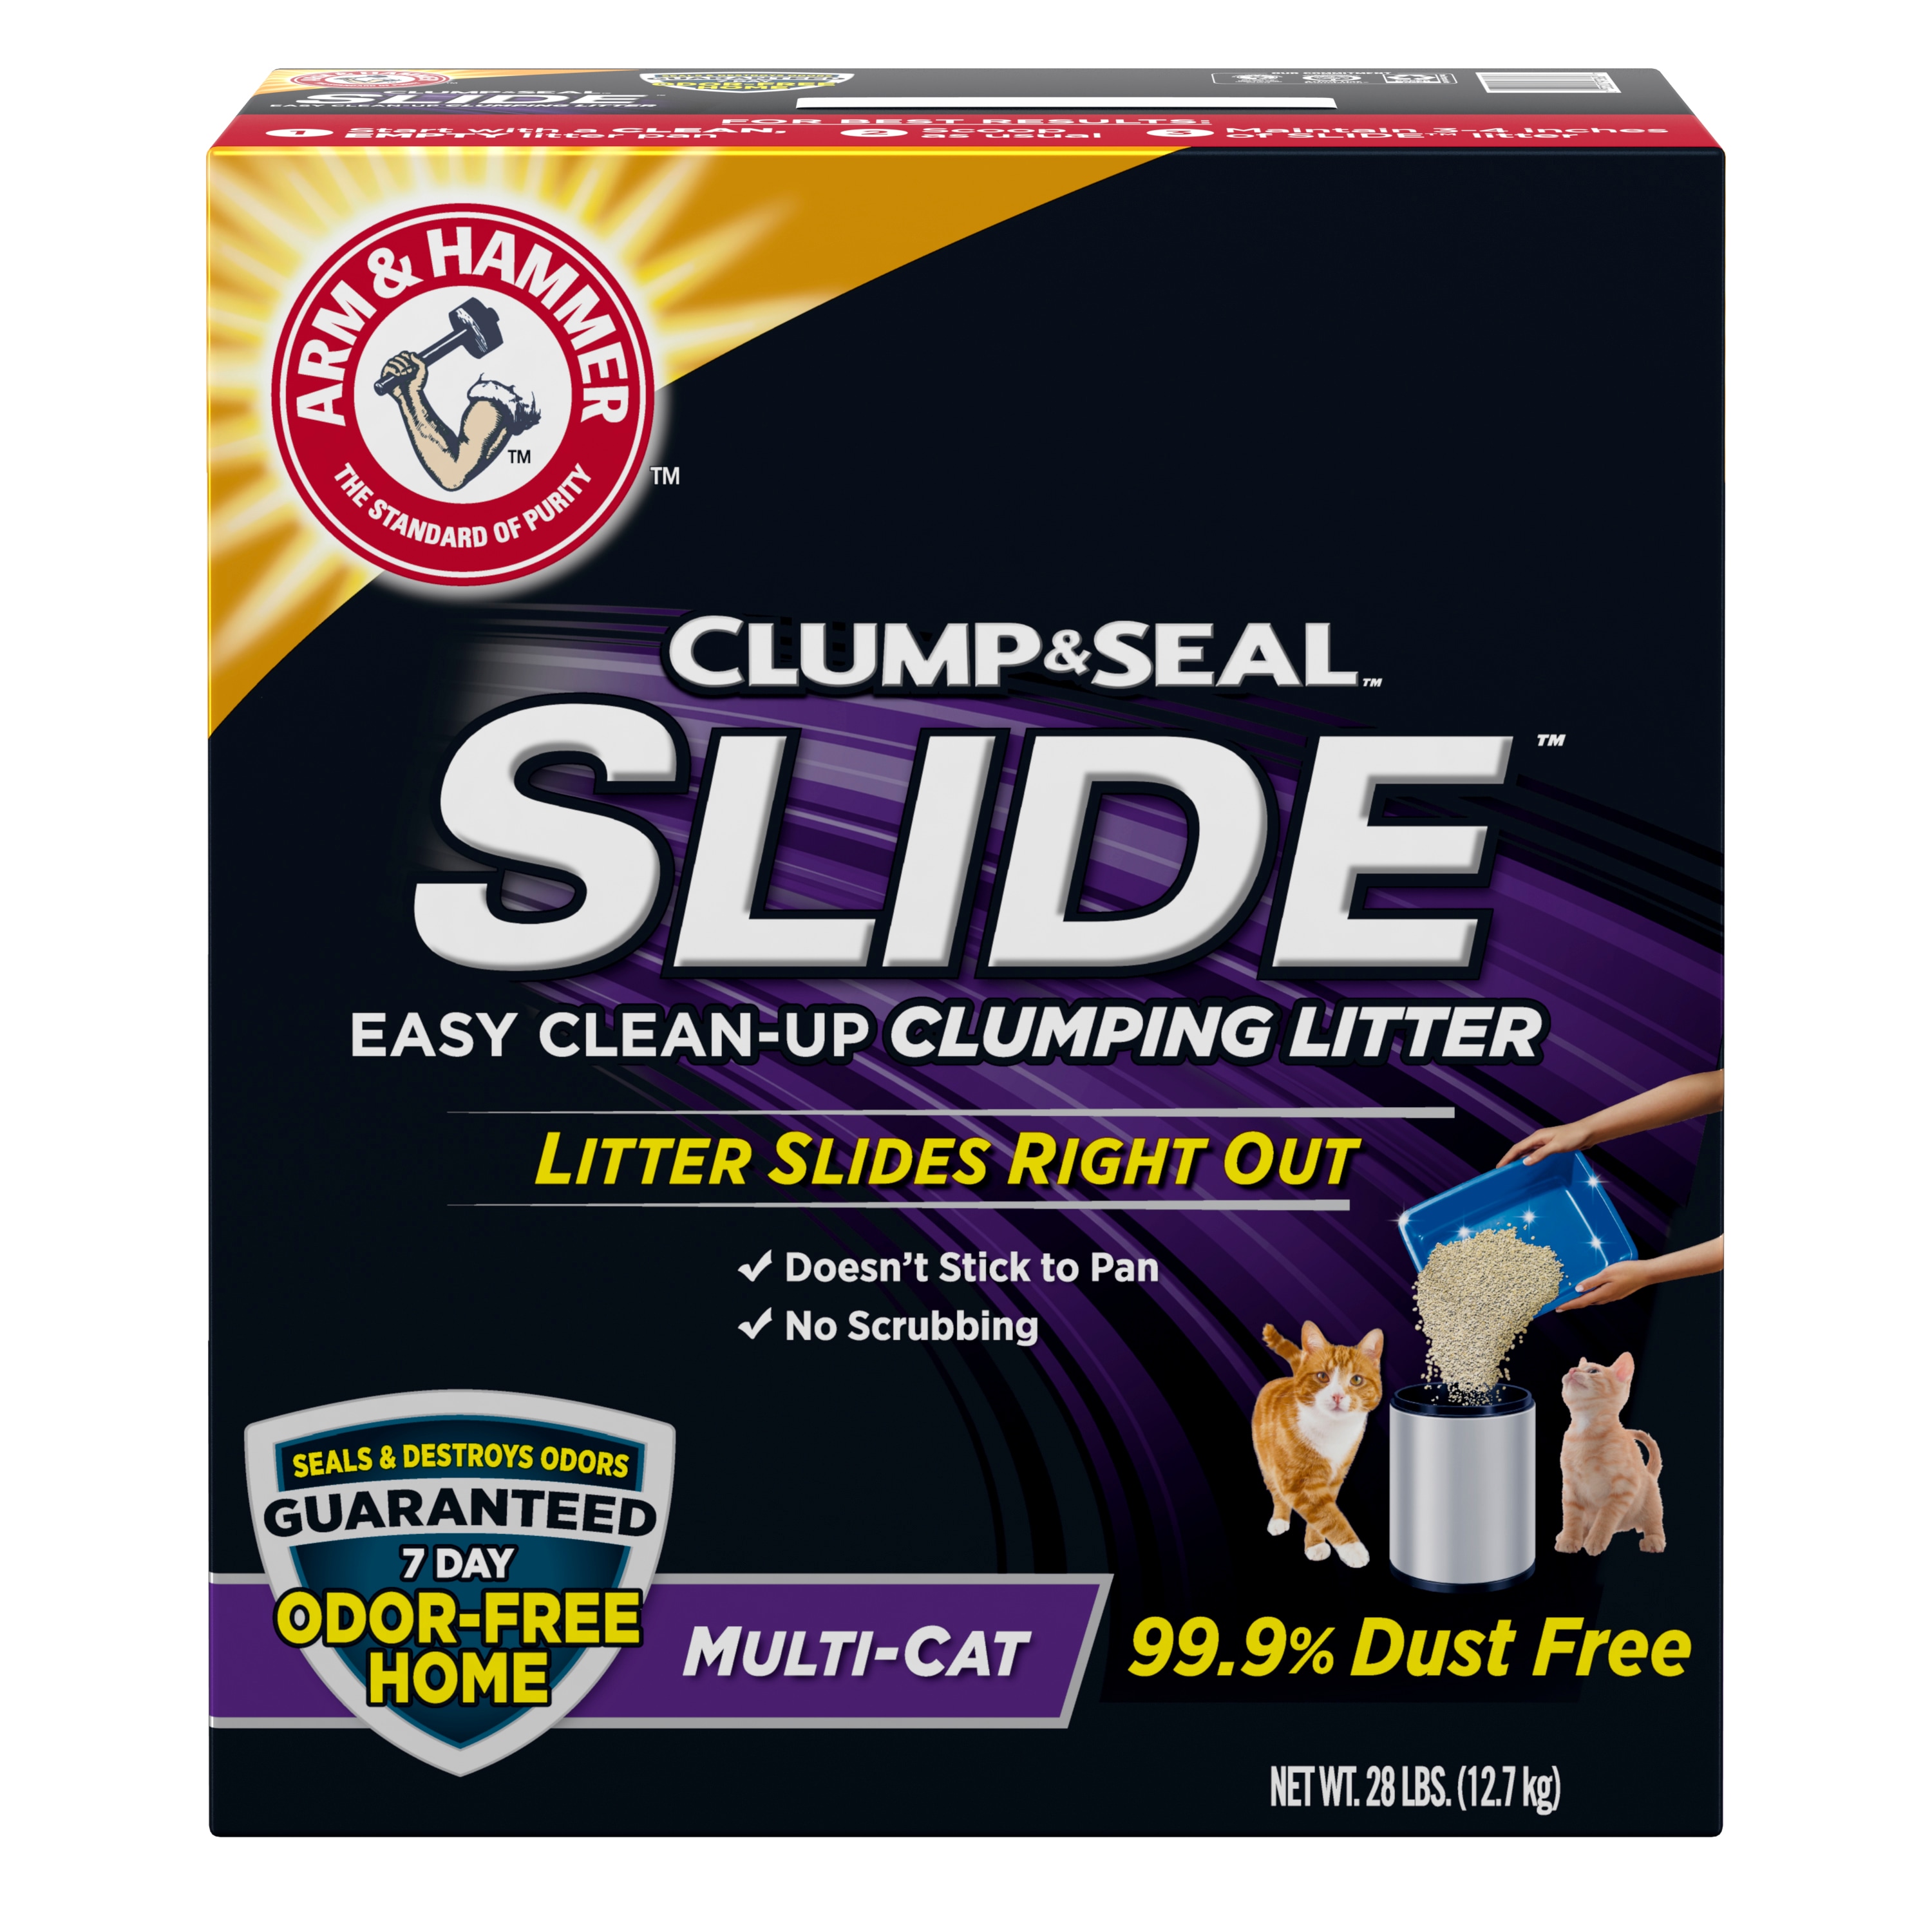 Arm & Hammer Crystal Cat Litter, Multiple Cat Formula, Clumping, Clear, 7 Day Odor Control, 99.9% Dust Free, Moisture-Activated, Easy Scooping